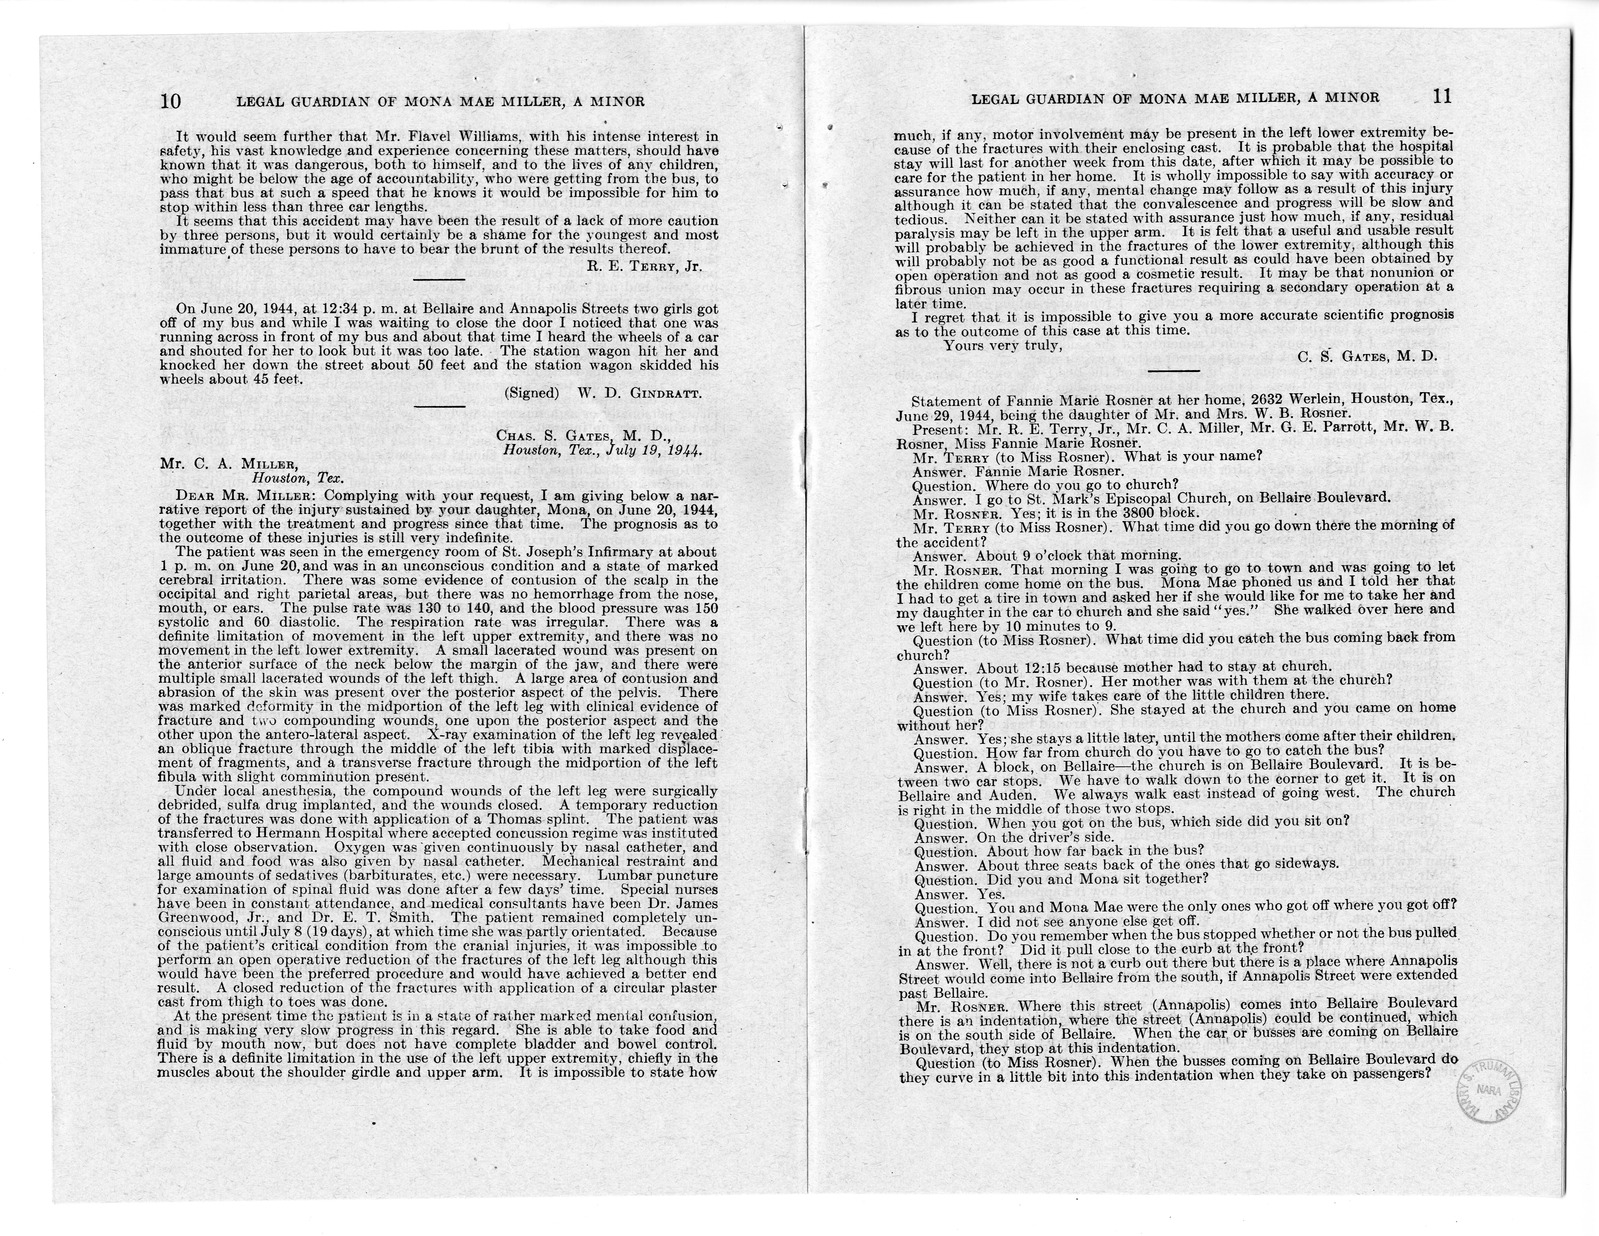 Memorandum from Harold D. Smith to M. C. Latta, H.R. 1857, For the Relief of the Legal Guardian of Mona Mae Miller, a Minor, with Attachments